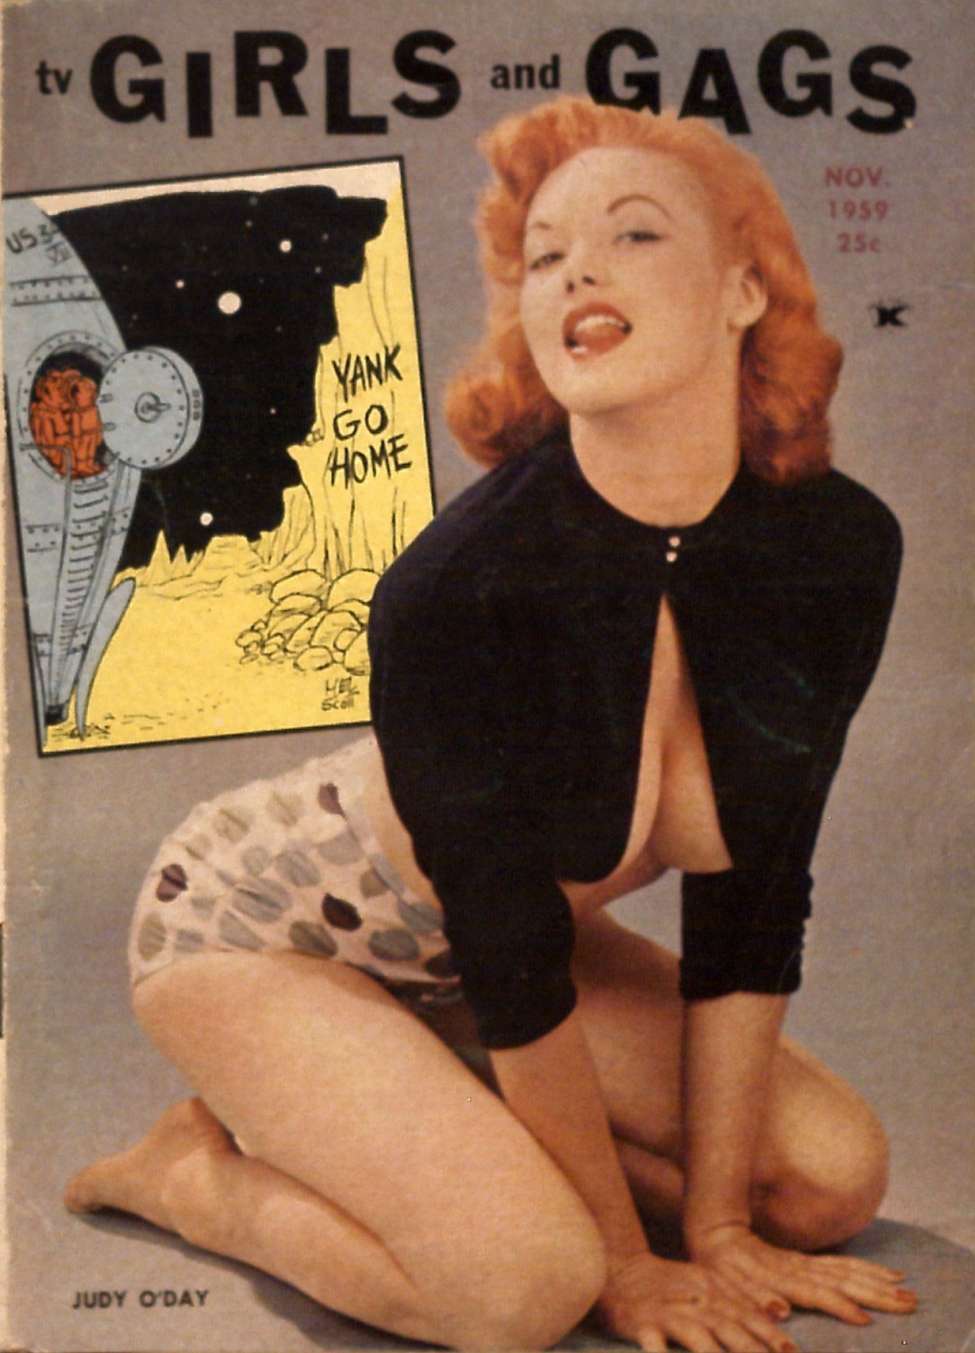 Comic Book Cover For TV Girls and Gags v6 6